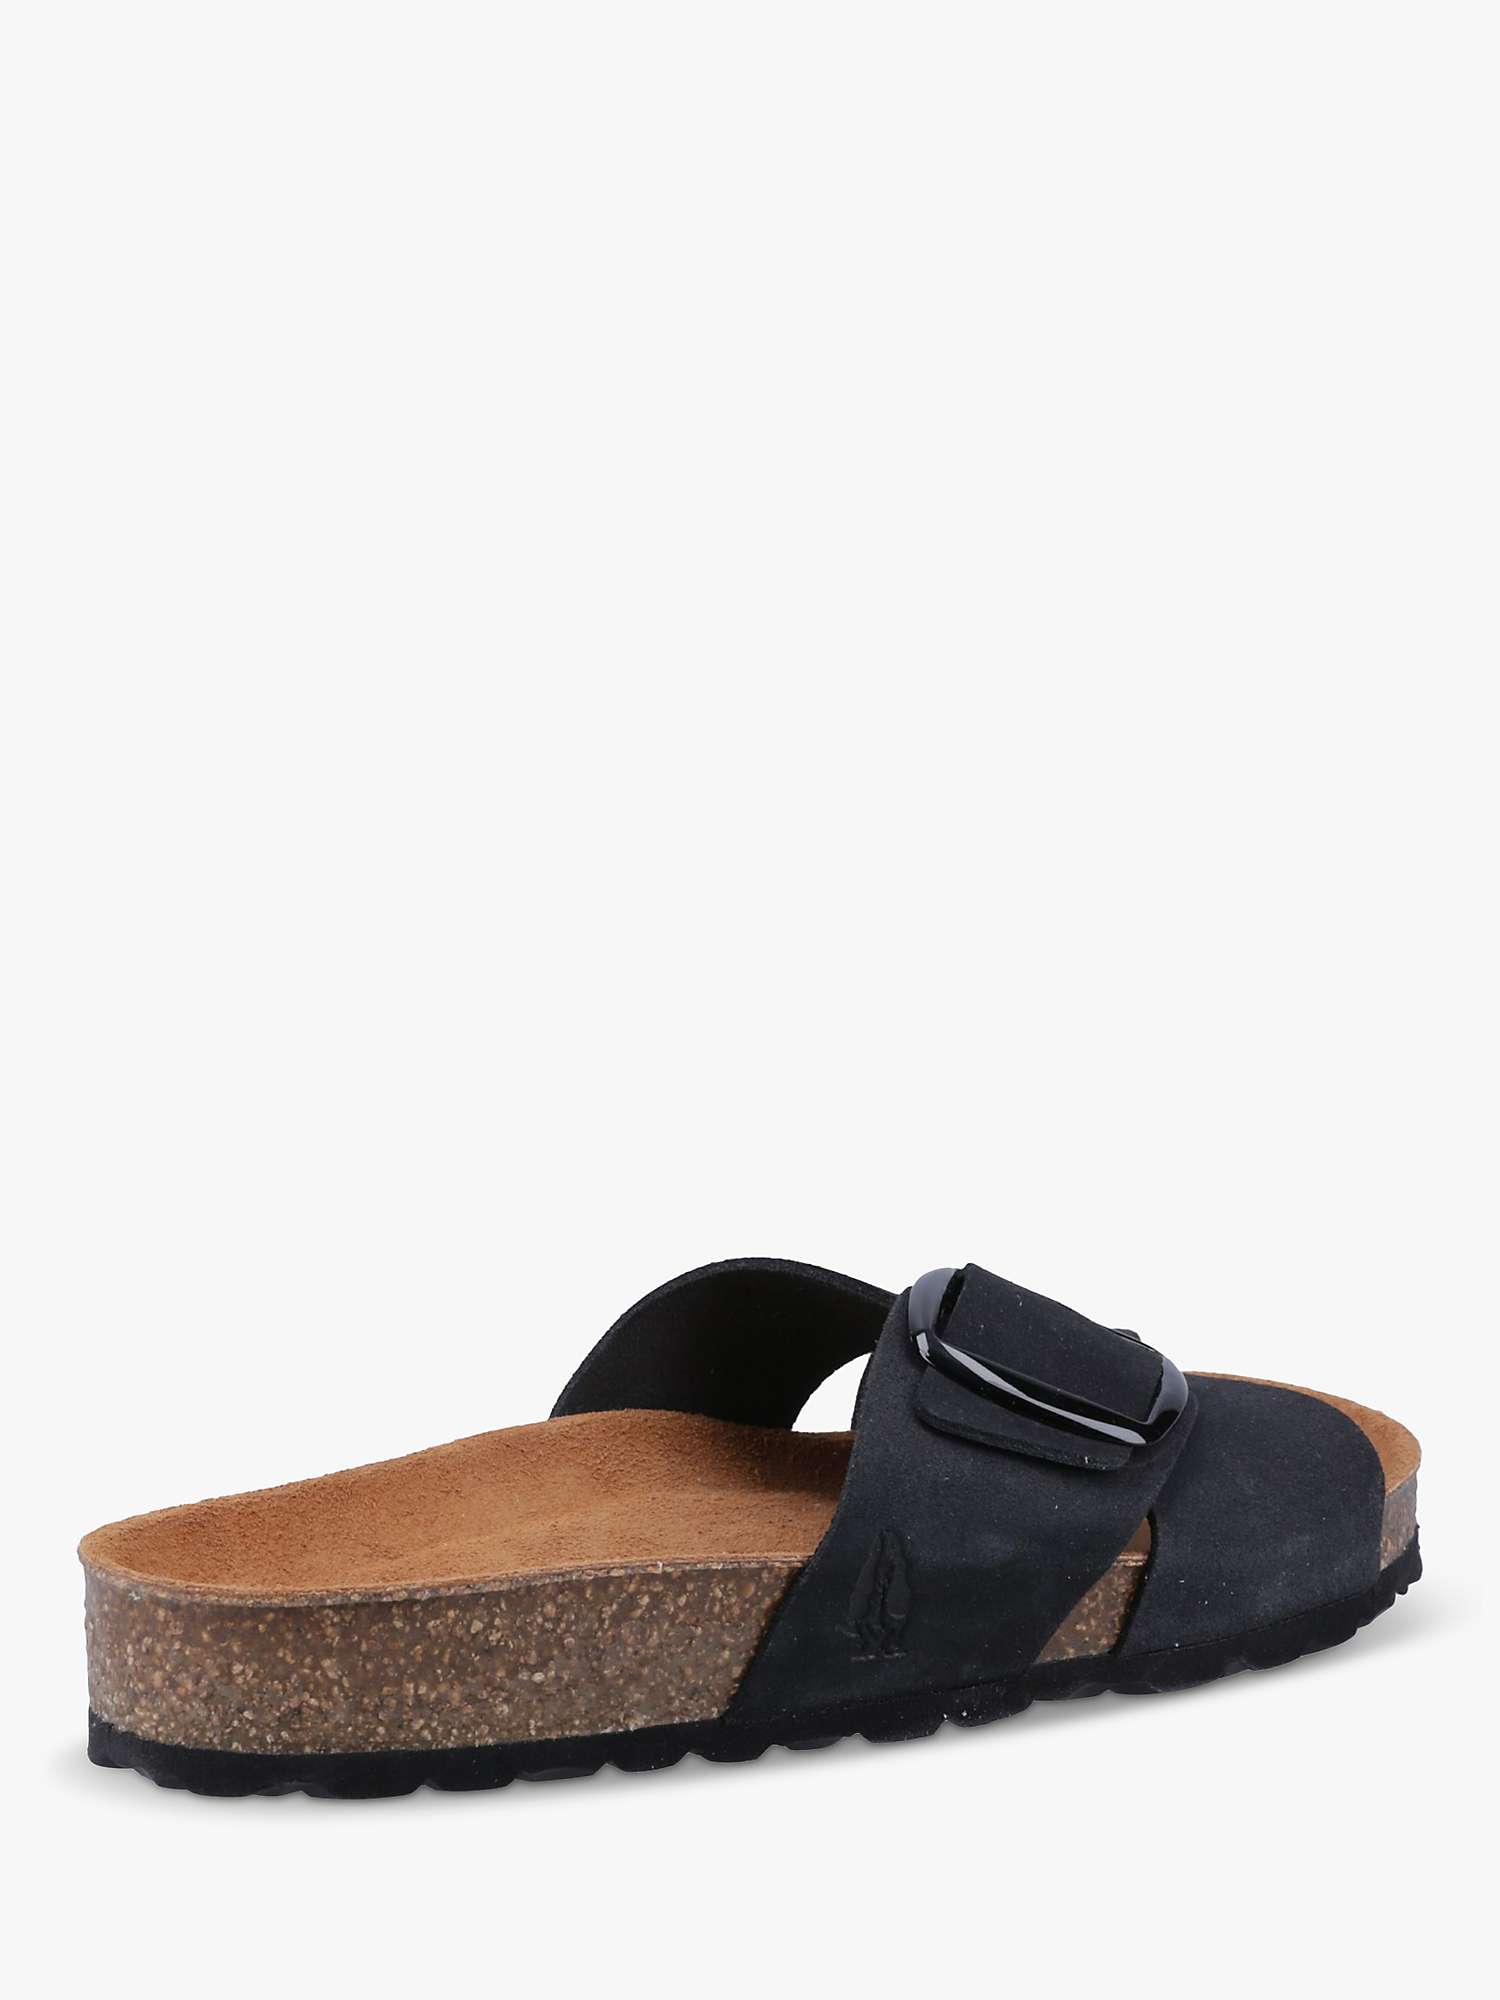 Buy Hush Puppies Becky Suede Cross Strap Sliders Online at johnlewis.com